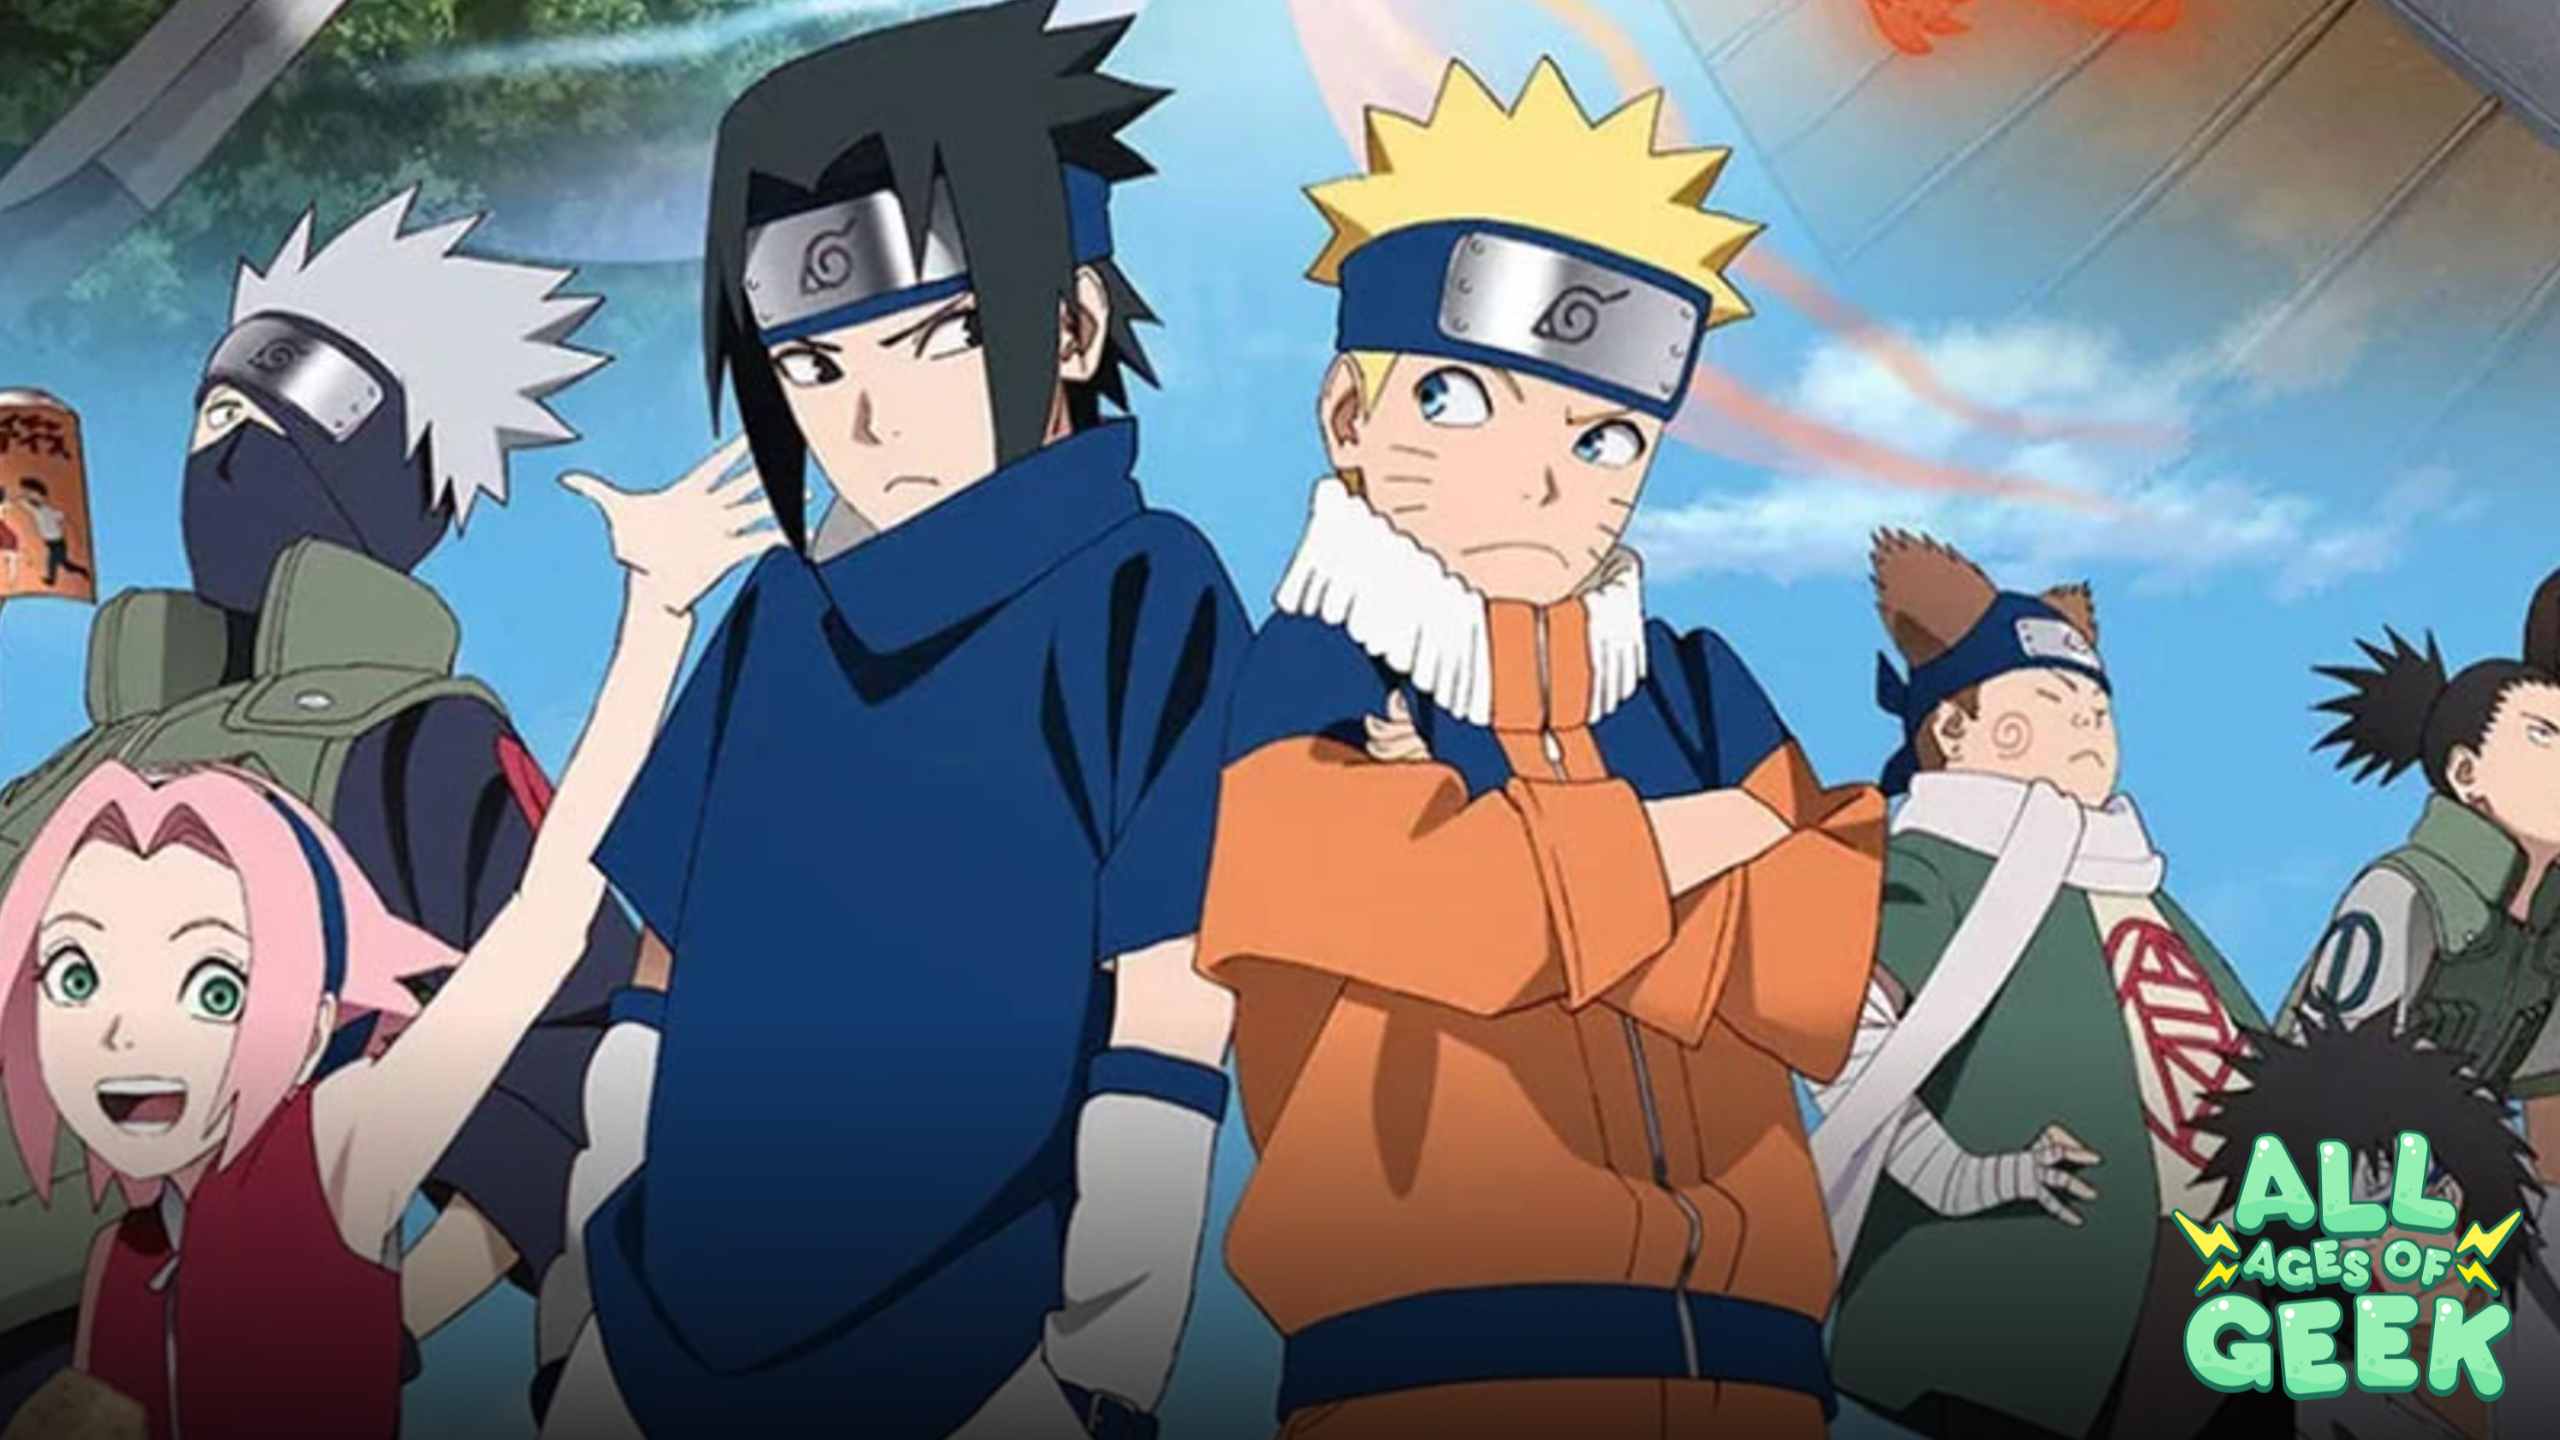 Naruto All Ages of Geek